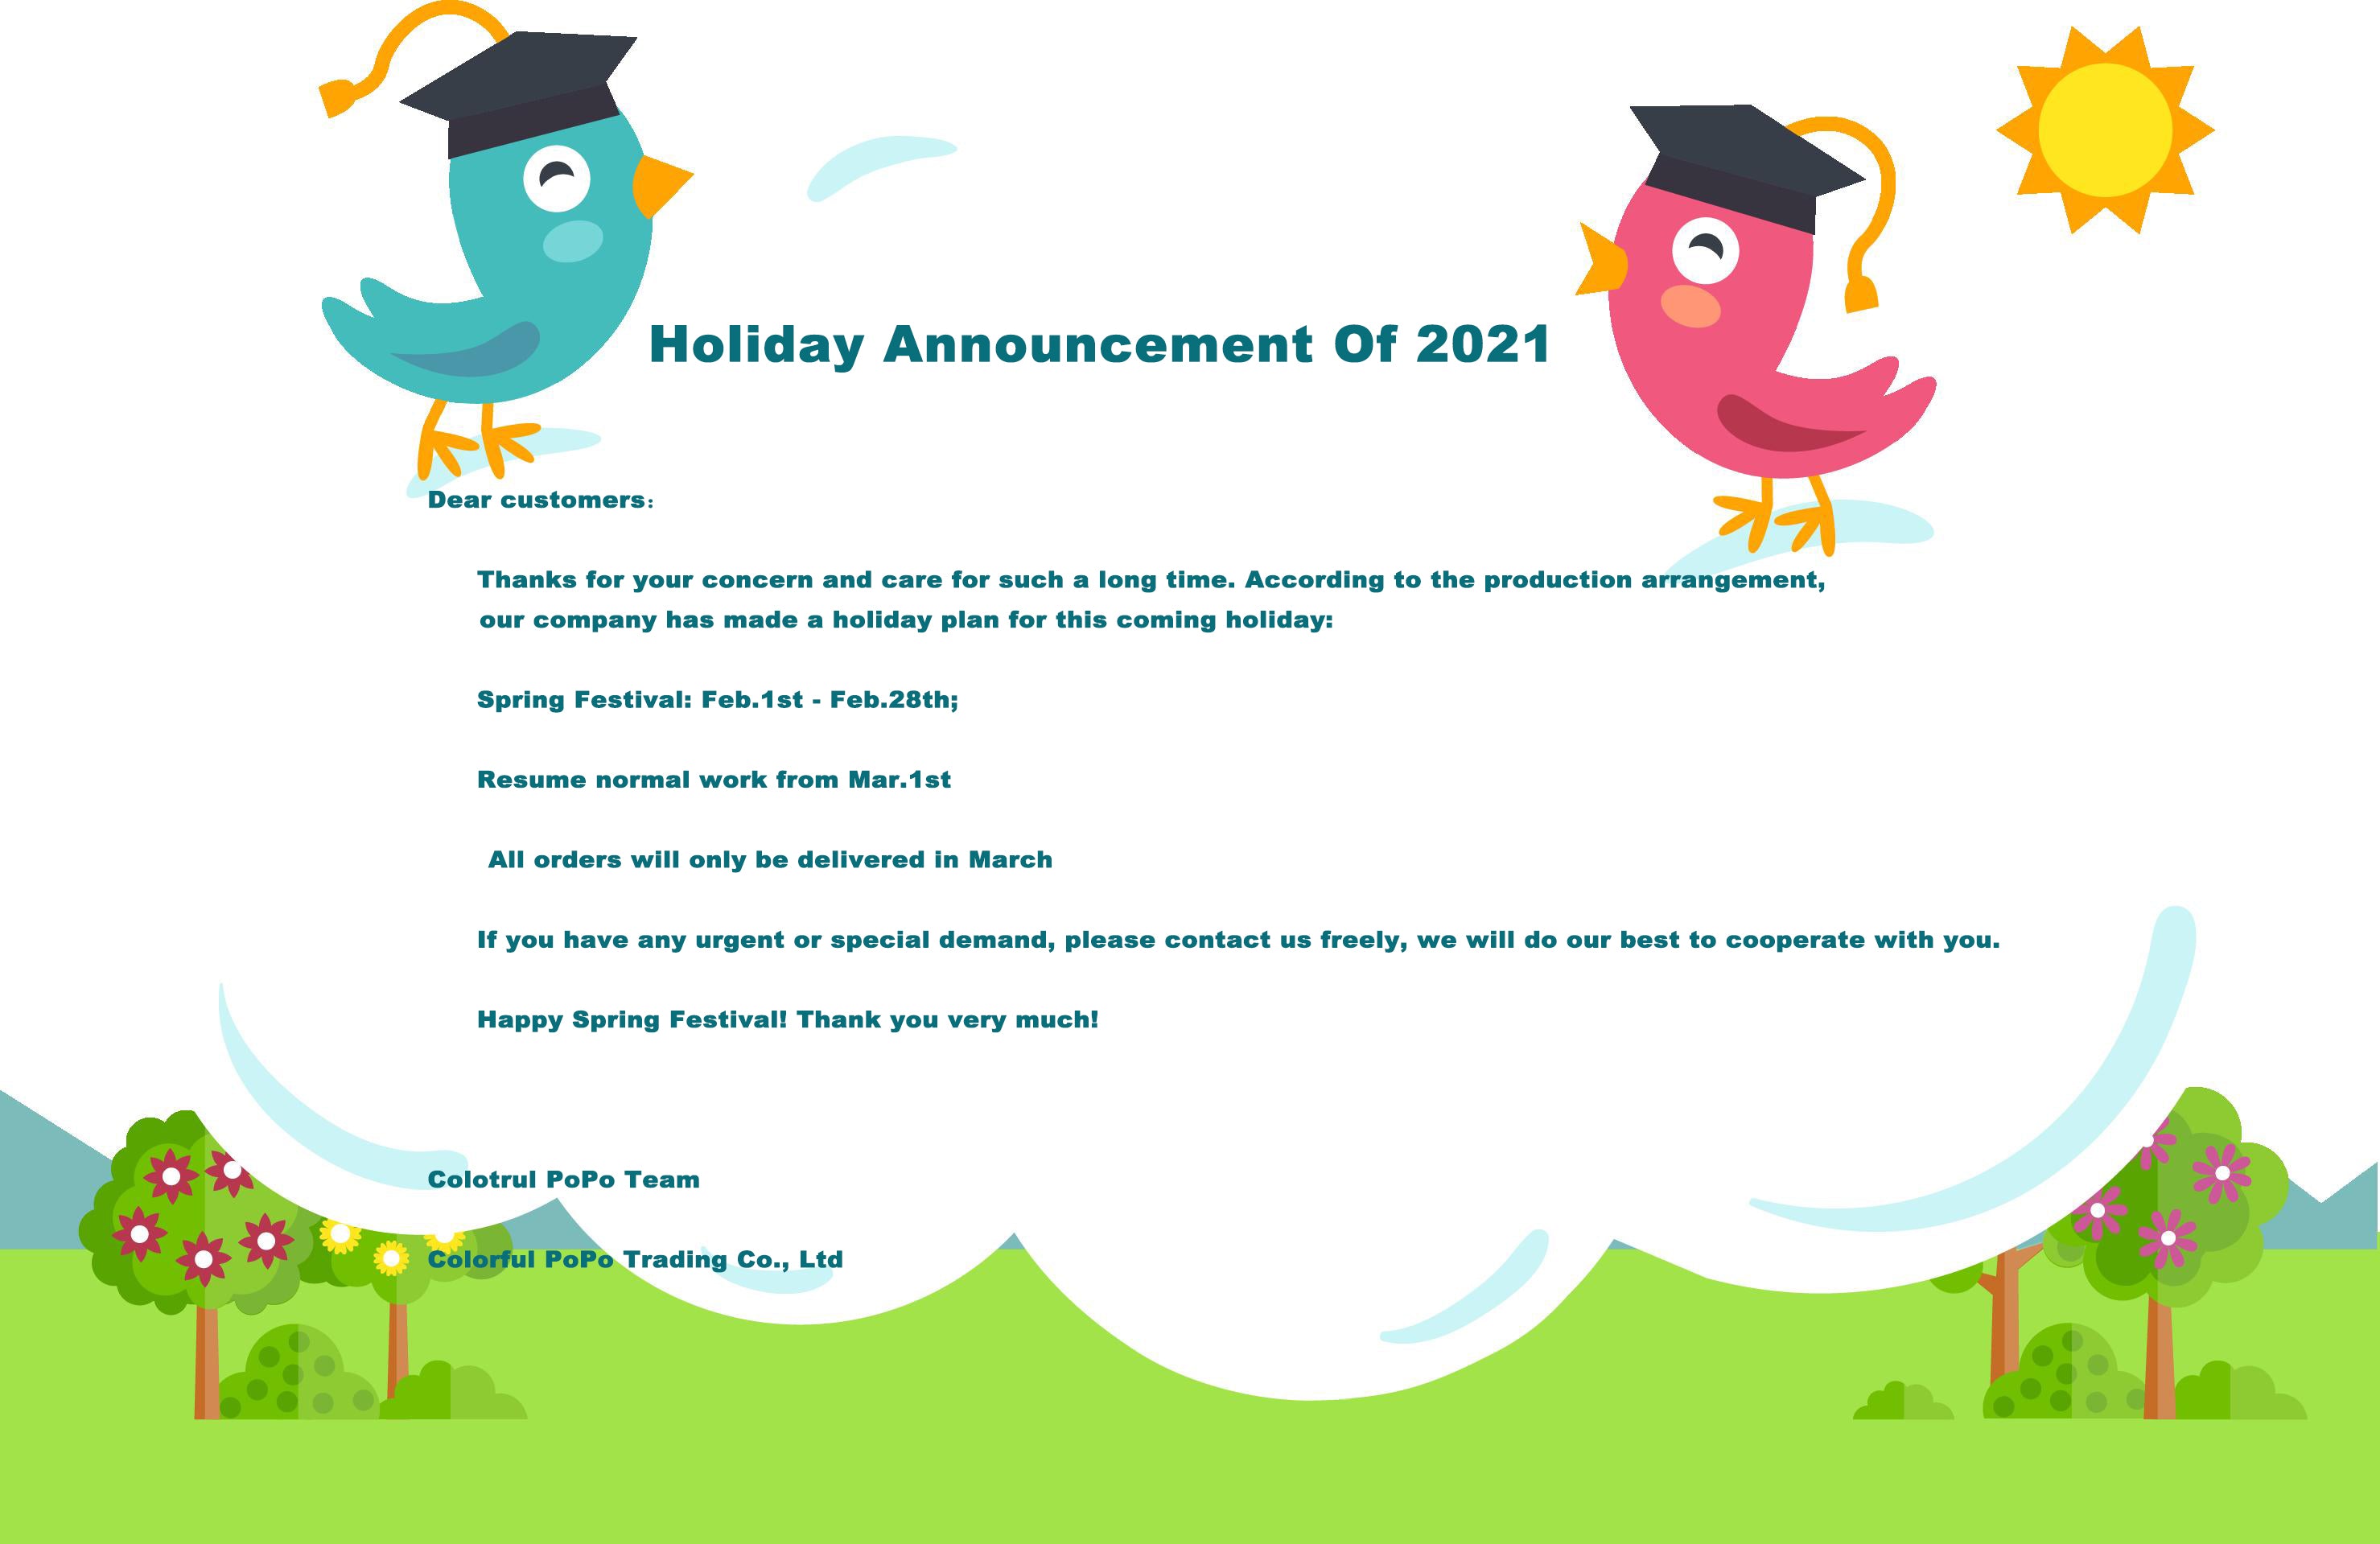 Holiday Announcement of 2021